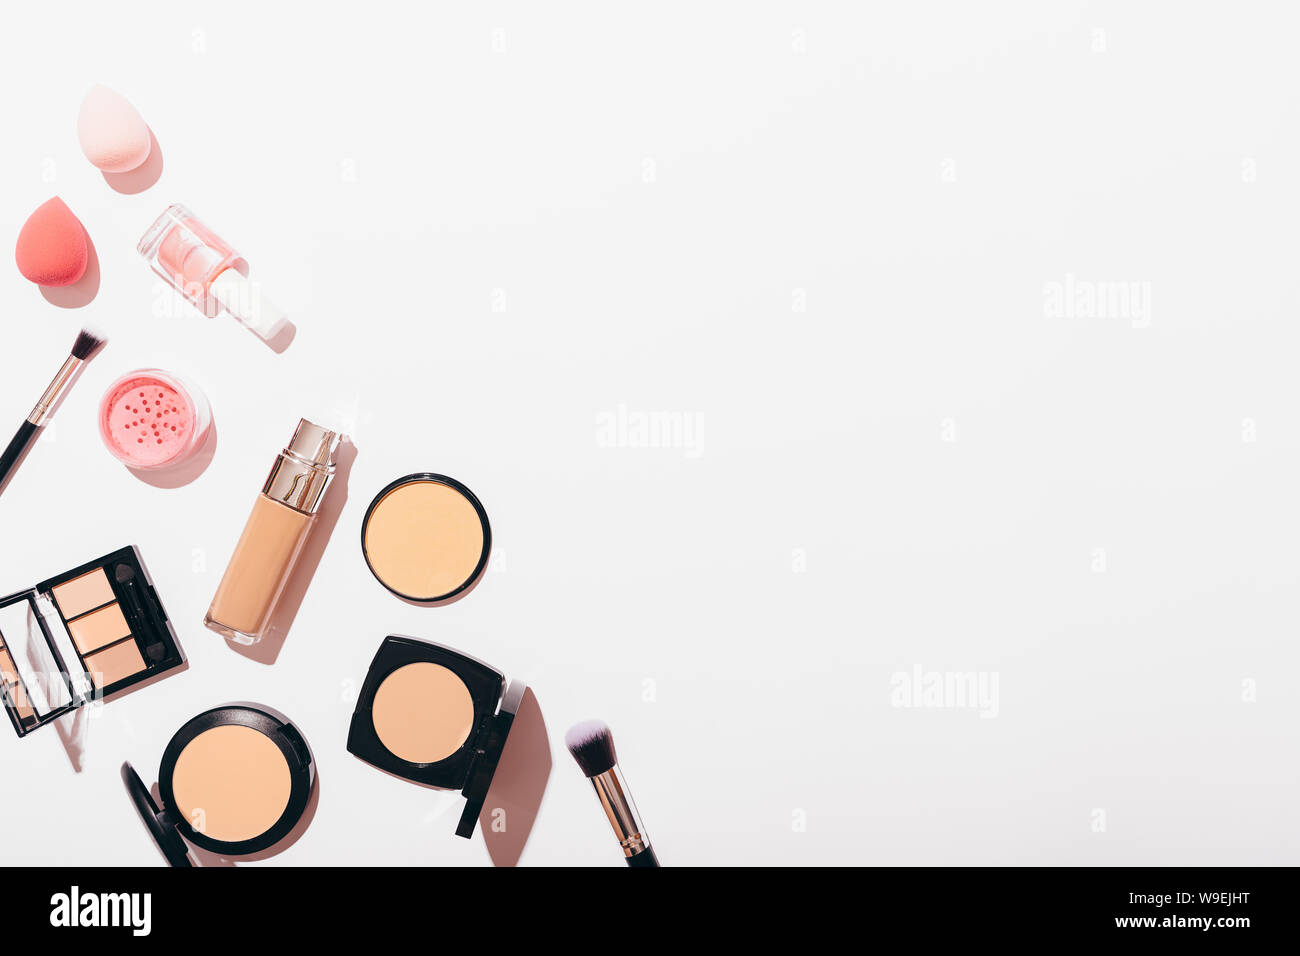 Flat lay composition of women's makeup products and accessories in white with copy space Stock Photo - Alamy